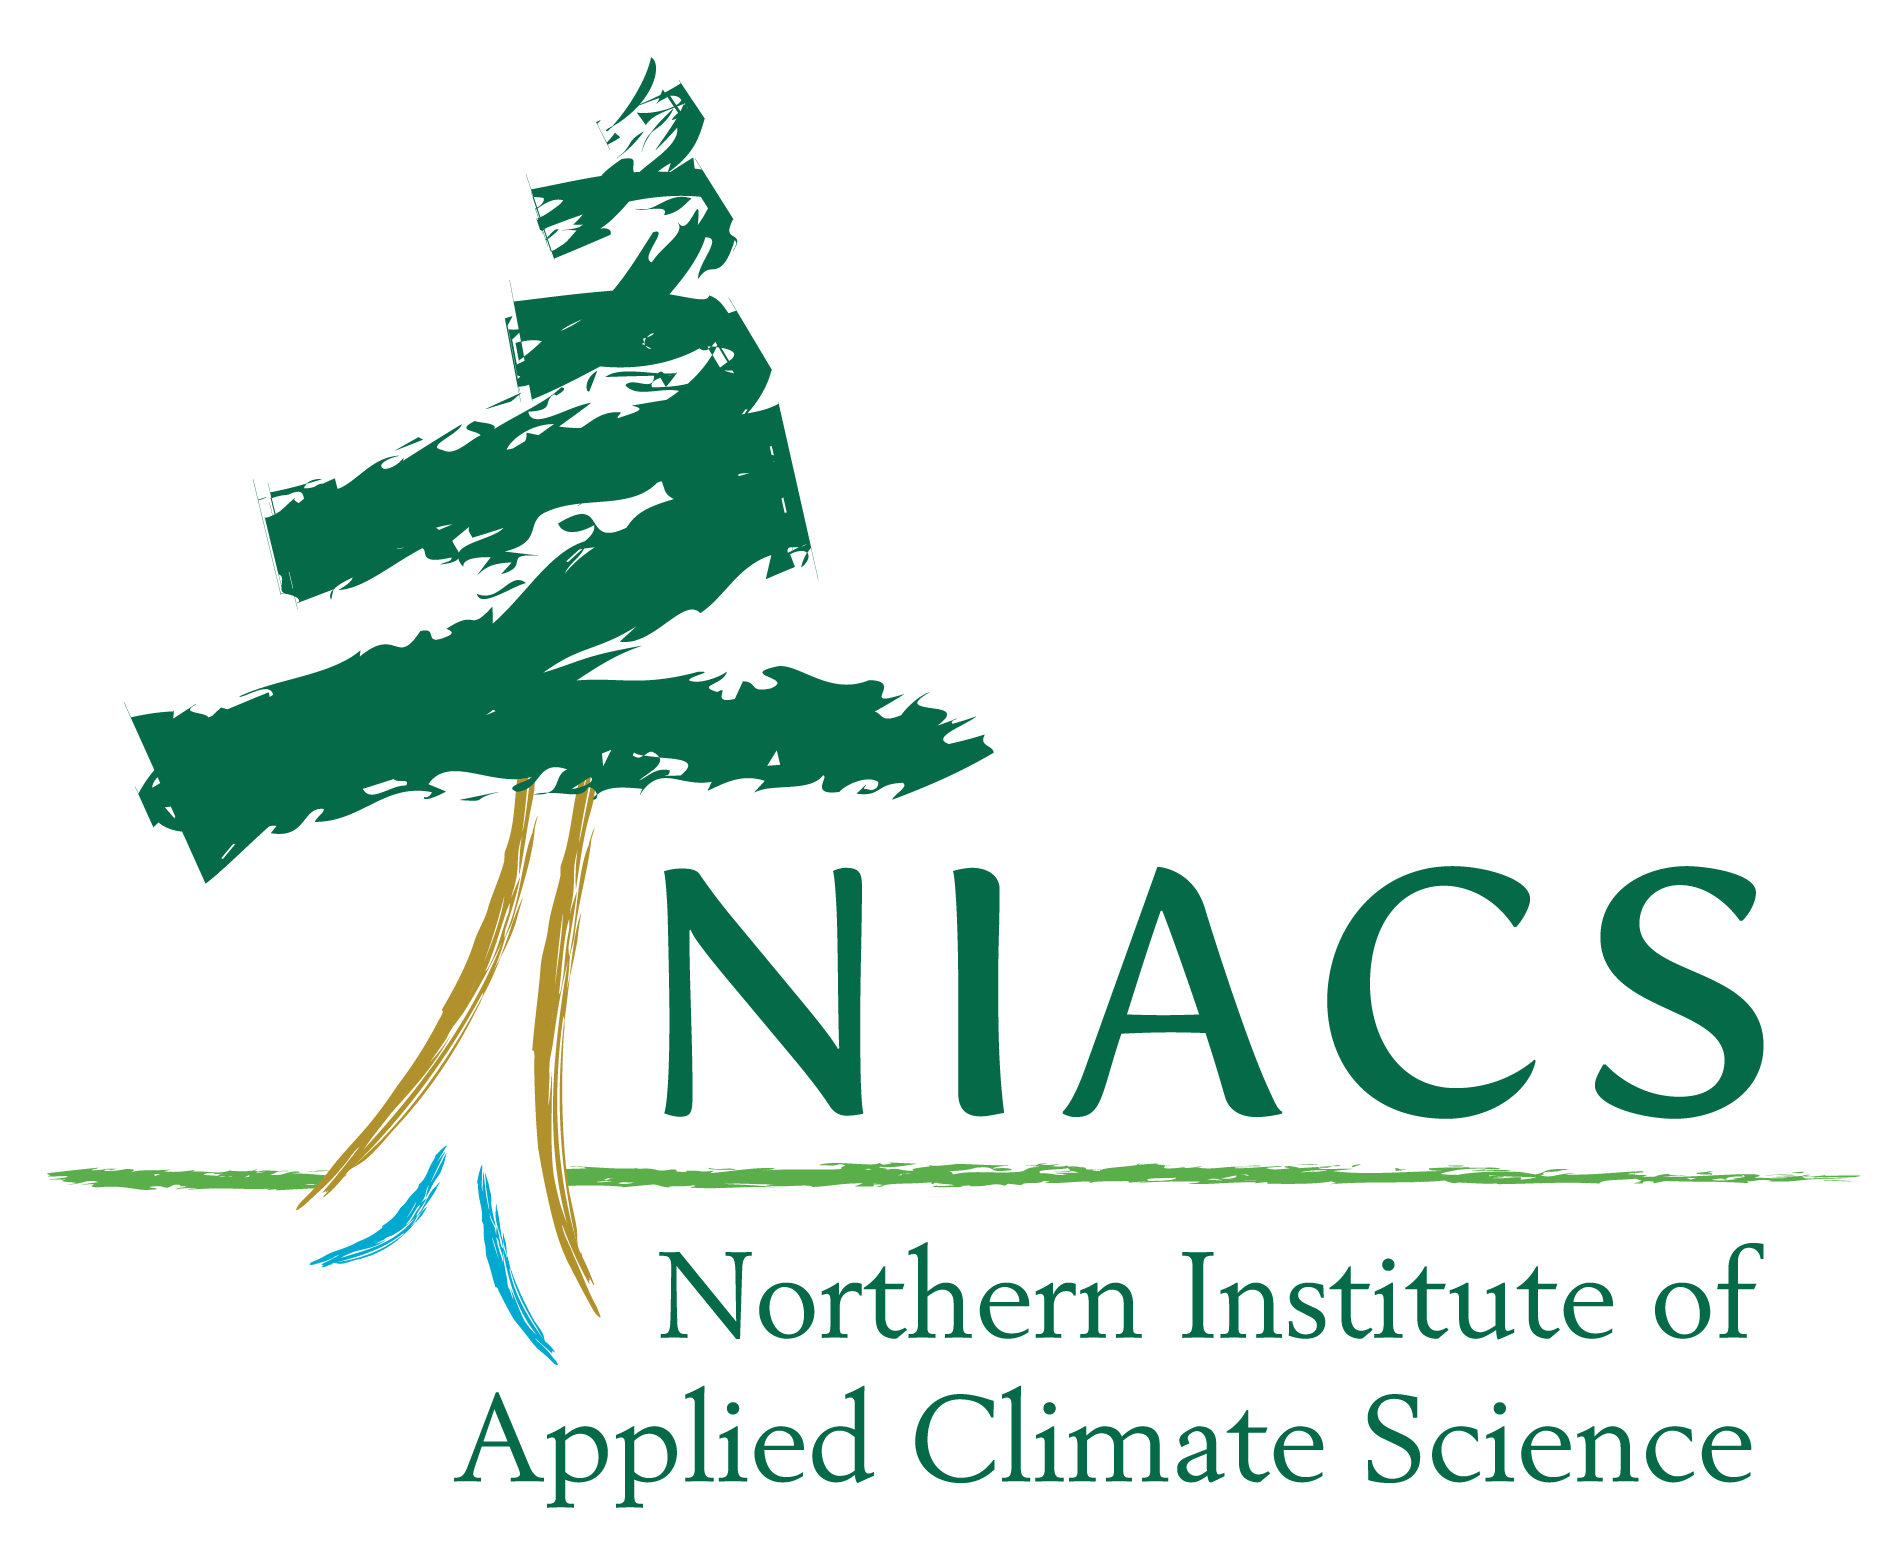 Northern Institute of Applied Climate Science glyph